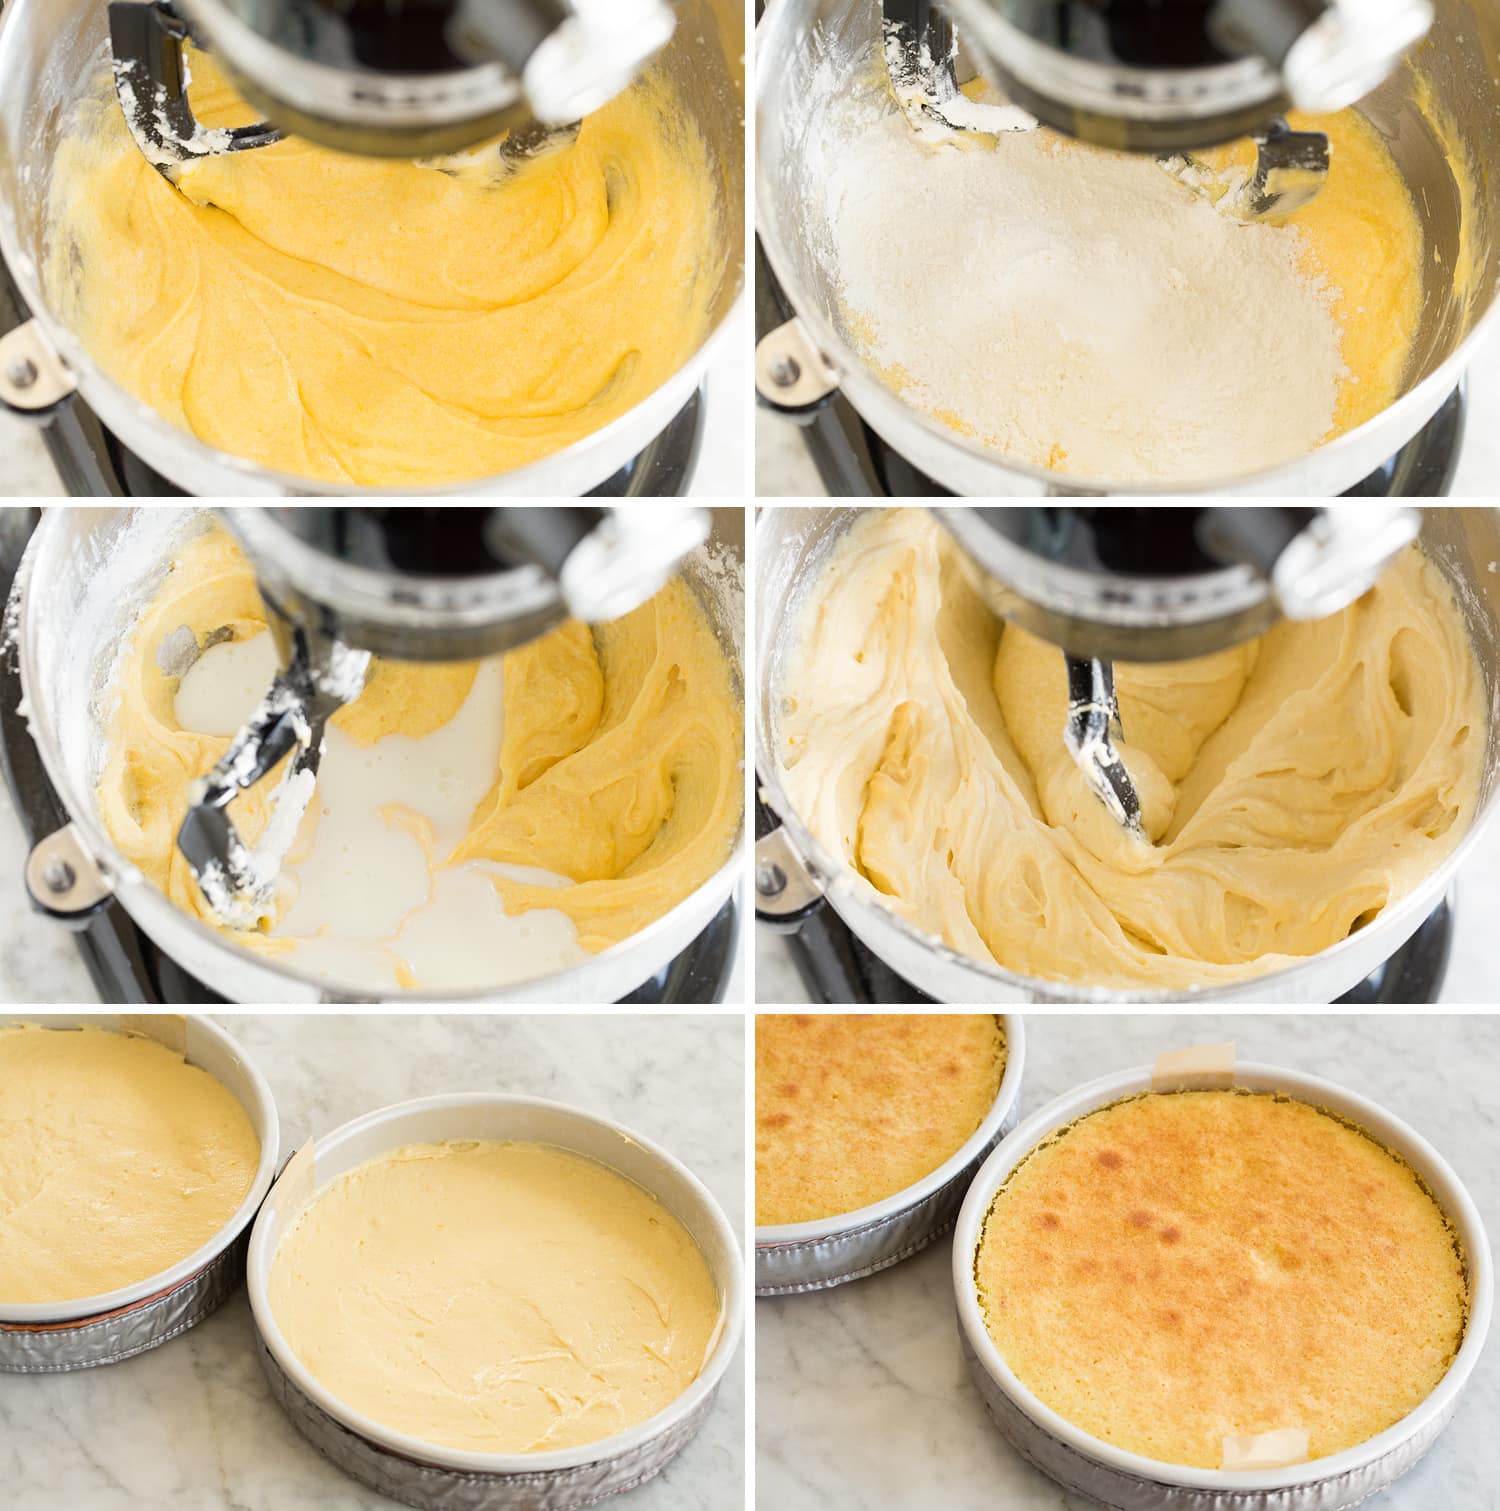 Continued steps of preparing yellow cake.